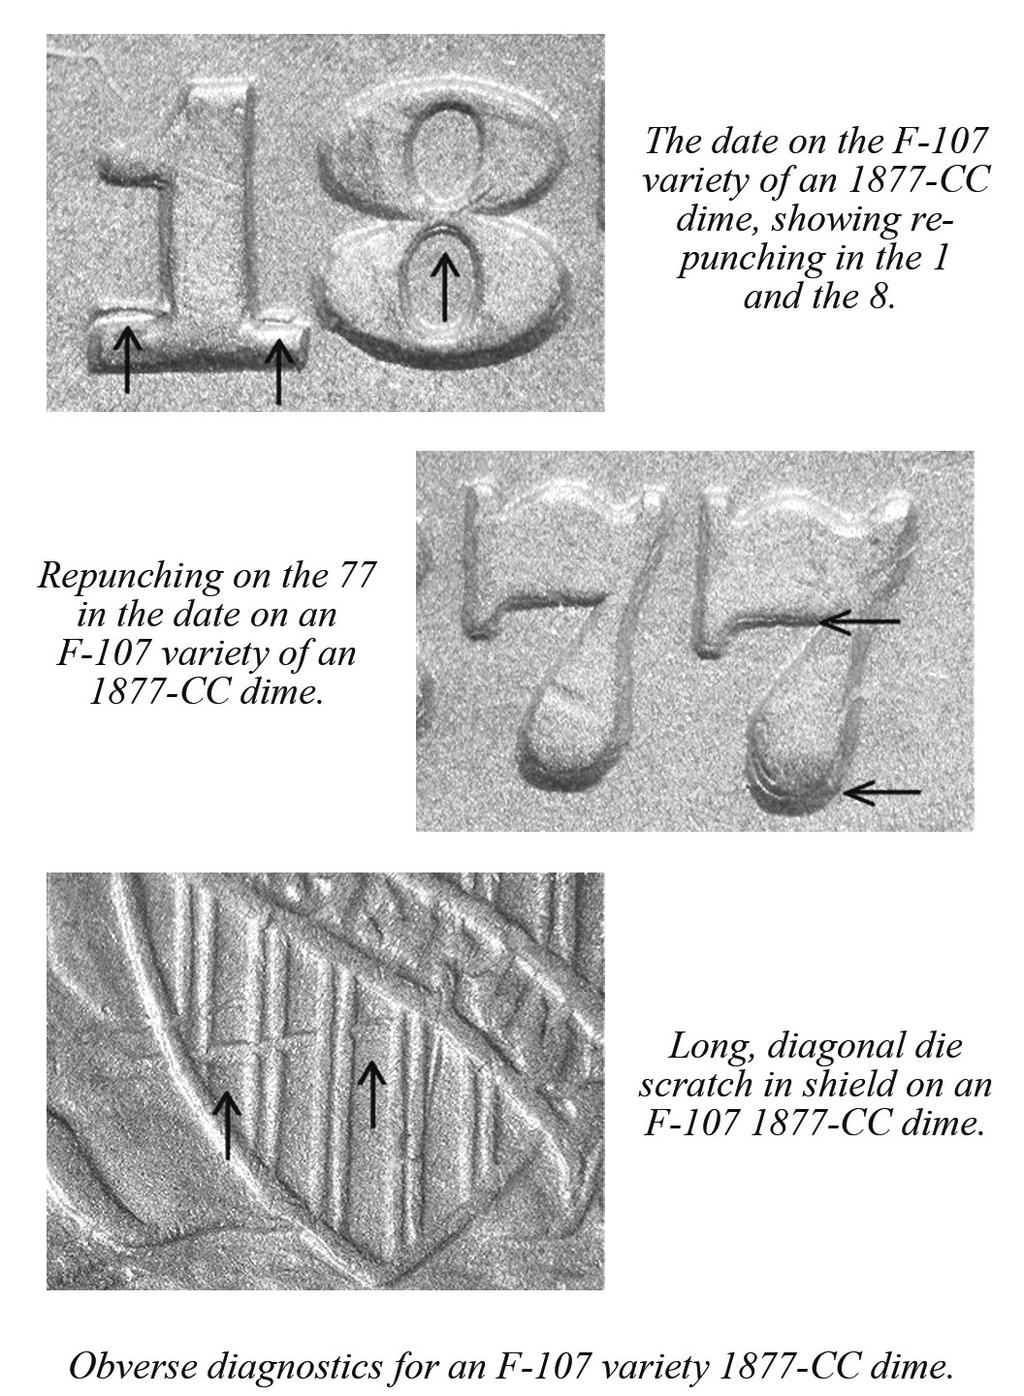 Guide, 4 th Edition, Volume 2. This example shows in the top part of the 7 there are traces of the top part of the numeral 6.